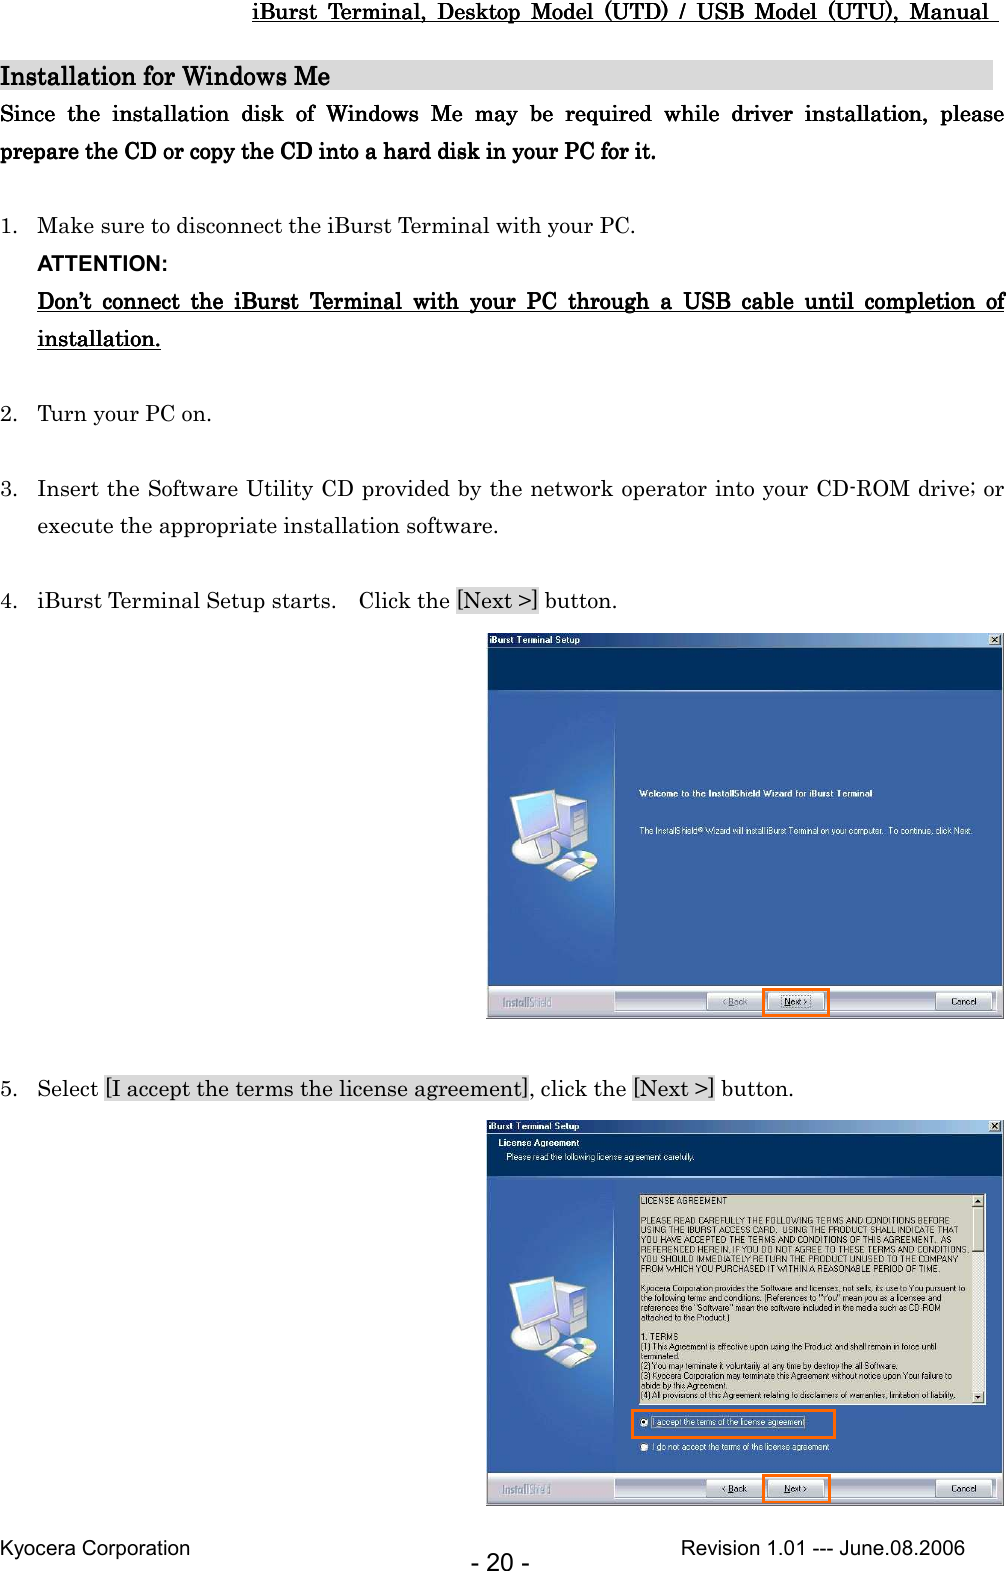 iBurst  Terminal,  Desktop  Model  (UTD)  /  USB  Model  (UTU),  Manual iBurst  Terminal,  Desktop  Model  (UTD)  /  USB  Model  (UTU),  Manual iBurst  Terminal,  Desktop  Model  (UTD)  /  USB  Model  (UTU),  Manual iBurst  Terminal,  Desktop  Model  (UTD)  /  USB  Model  (UTU),  Manual       Kyocera Corporation                                                                                              Revision 1.01 --- June.08.2006 - 20 - Installation for Windows MInstallation for Windows MInstallation for Windows MInstallation for Windows Me                                                                                                 e                                                 e                                                 e                                                                     Since  tSince  tSince  tSince  the  installation  disk  of he  installation  disk  of he  installation  disk  of he  installation  disk  of  Windows  MeWindows  MeWindows  MeWindows  Me     maymaymaymay  b  b  b  be e e e  required  while required  while required  while required  while  driver  installation,  please driver  installation,  please driver  installation,  please driver  installation,  please prepare prepare prepare prepare the CD or copy the the CD or copy the the CD or copy the the CD or copy the CDCDCDCD    intointointointo a hard disk in your PC  a hard disk in your PC  a hard disk in your PC  a hard disk in your PC for it.for it.for it.for it.     1. Make sure to disconnect the iBurst Terminal with your PC. ATTENTION: DonDonDonDon’’’’t  connect  the  iBurst  connect  the  iBurst  connect  the  iBurst  connect  the  iBurst  Terminal  with  your  PC  through  a  USB  cable  until  completion  of t  Terminal  with  your  PC  through  a  USB  cable  until  completion  of t  Terminal  with  your  PC  through  a  USB  cable  until  completion  of t  Terminal  with  your  PC  through  a  USB  cable  until  completion  of installation.installation.installation.installation.     2. Turn your PC on.  3. Insert the Software Utility CD provided by the network operator into your CD-ROM drive; or execute the appropriate installation software.  4. iBurst Terminal Setup starts.    Click the [Next &gt;] button.   5. Select [I accept the terms the license agreement], click the [Next &gt;] button.  